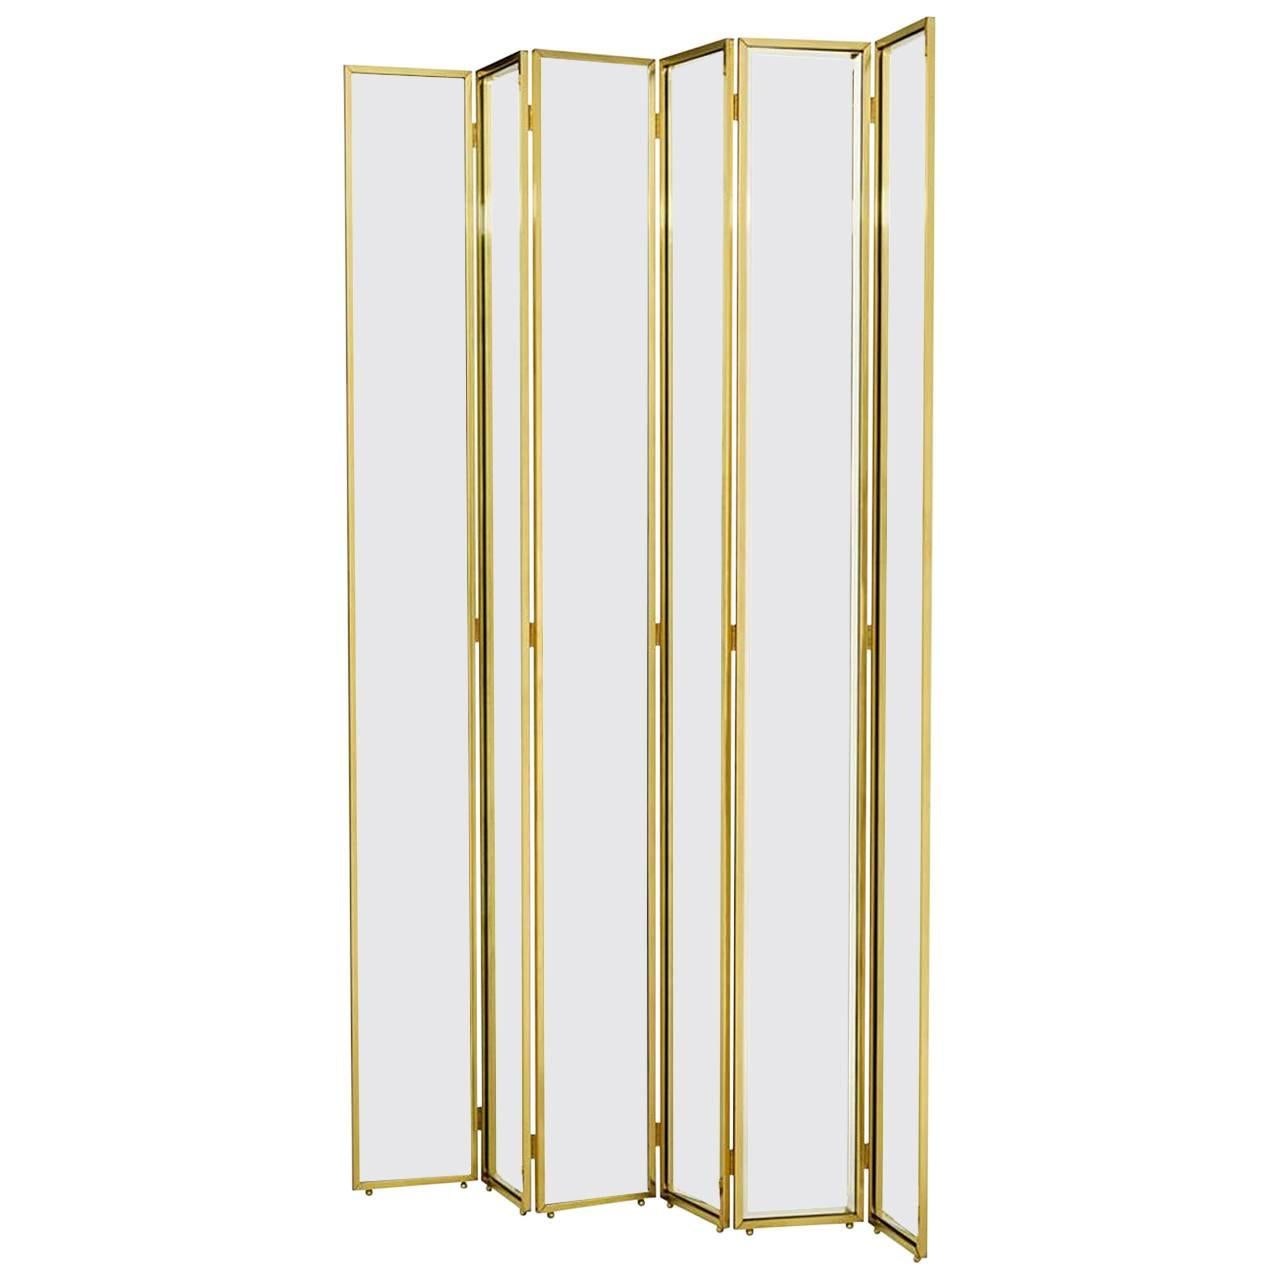 Miss Folding Screen in Gold Finish or Polished Stainless Steel Finish